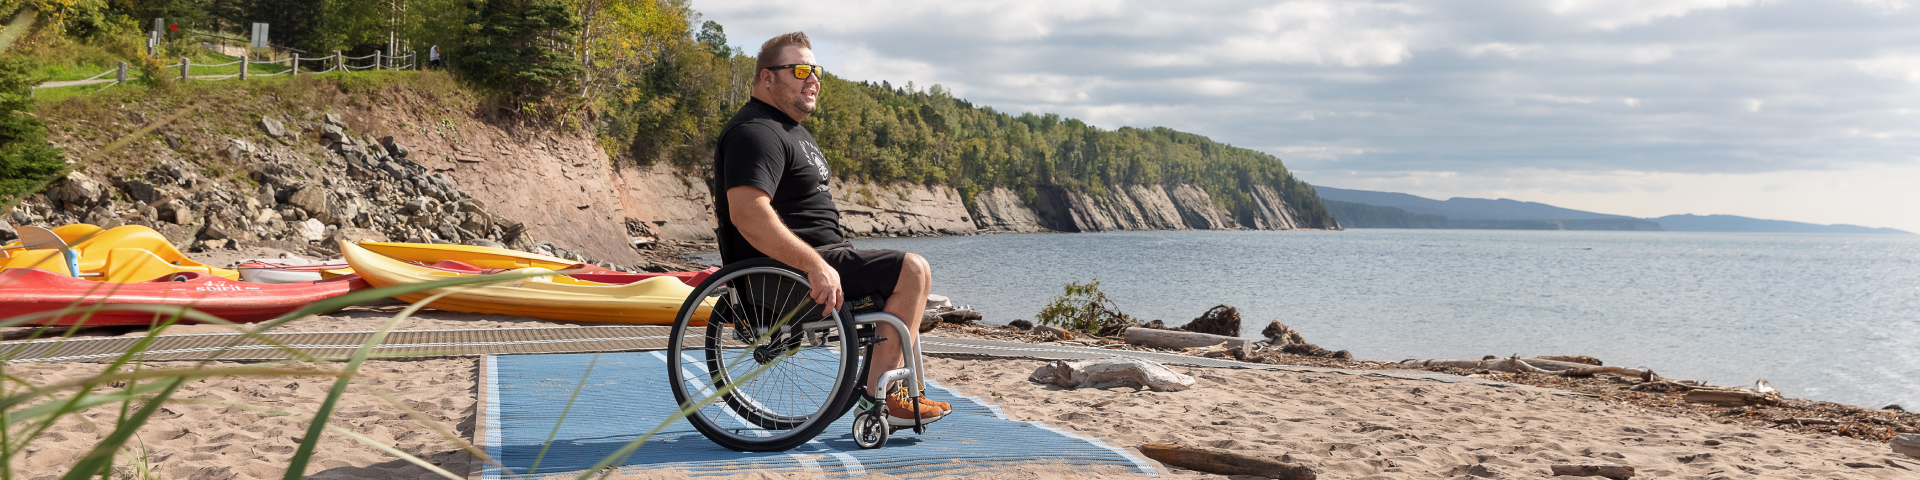 On a universal access mat, a man in a wheelchair looks out over the sea.